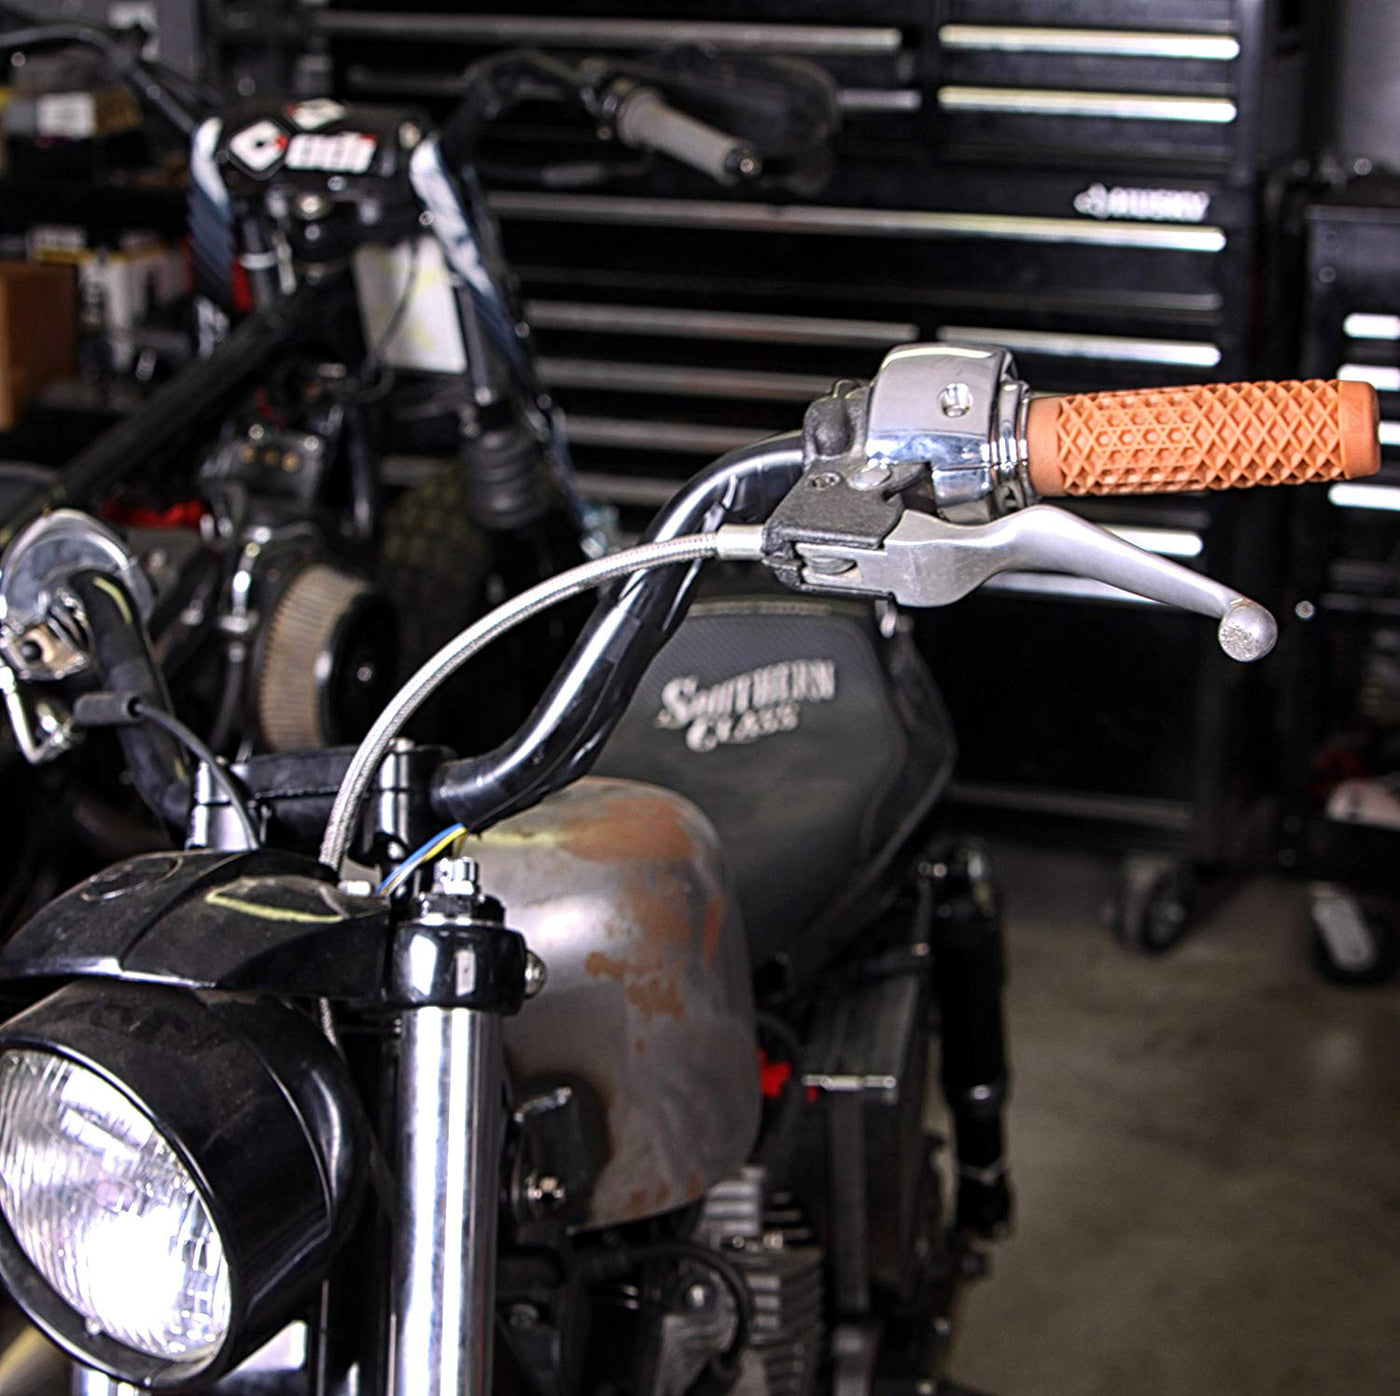 An ODI Vans + Cult Motorcycle Grips - 7/8" Gum Rubber parked in a garage.